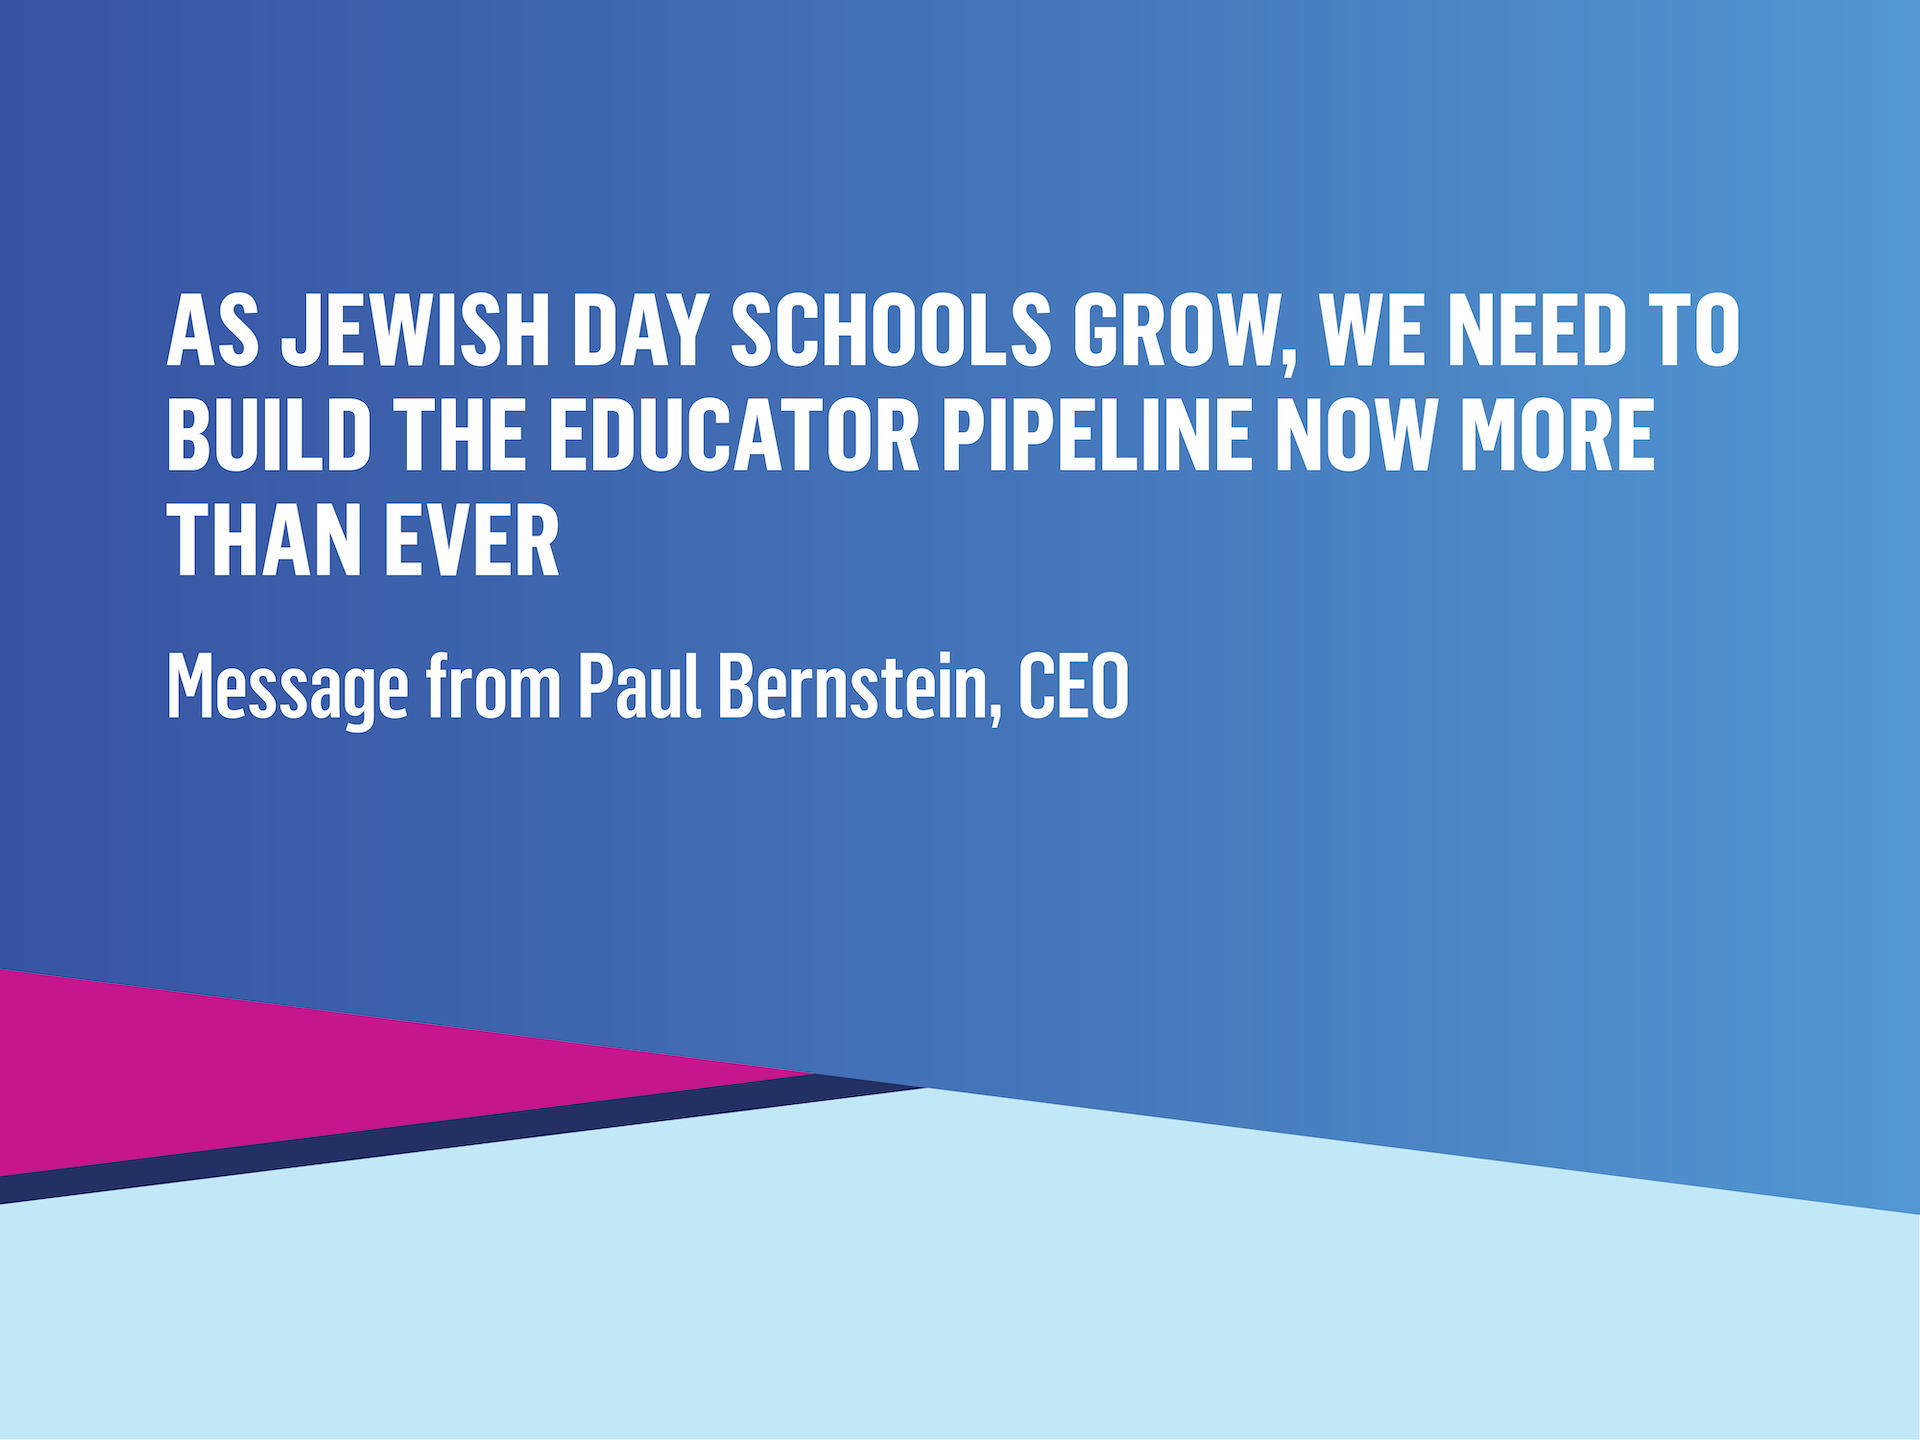 As Jewish Day Schools Grow, We Need to Build the Educator Pipeline Now More Than Ever